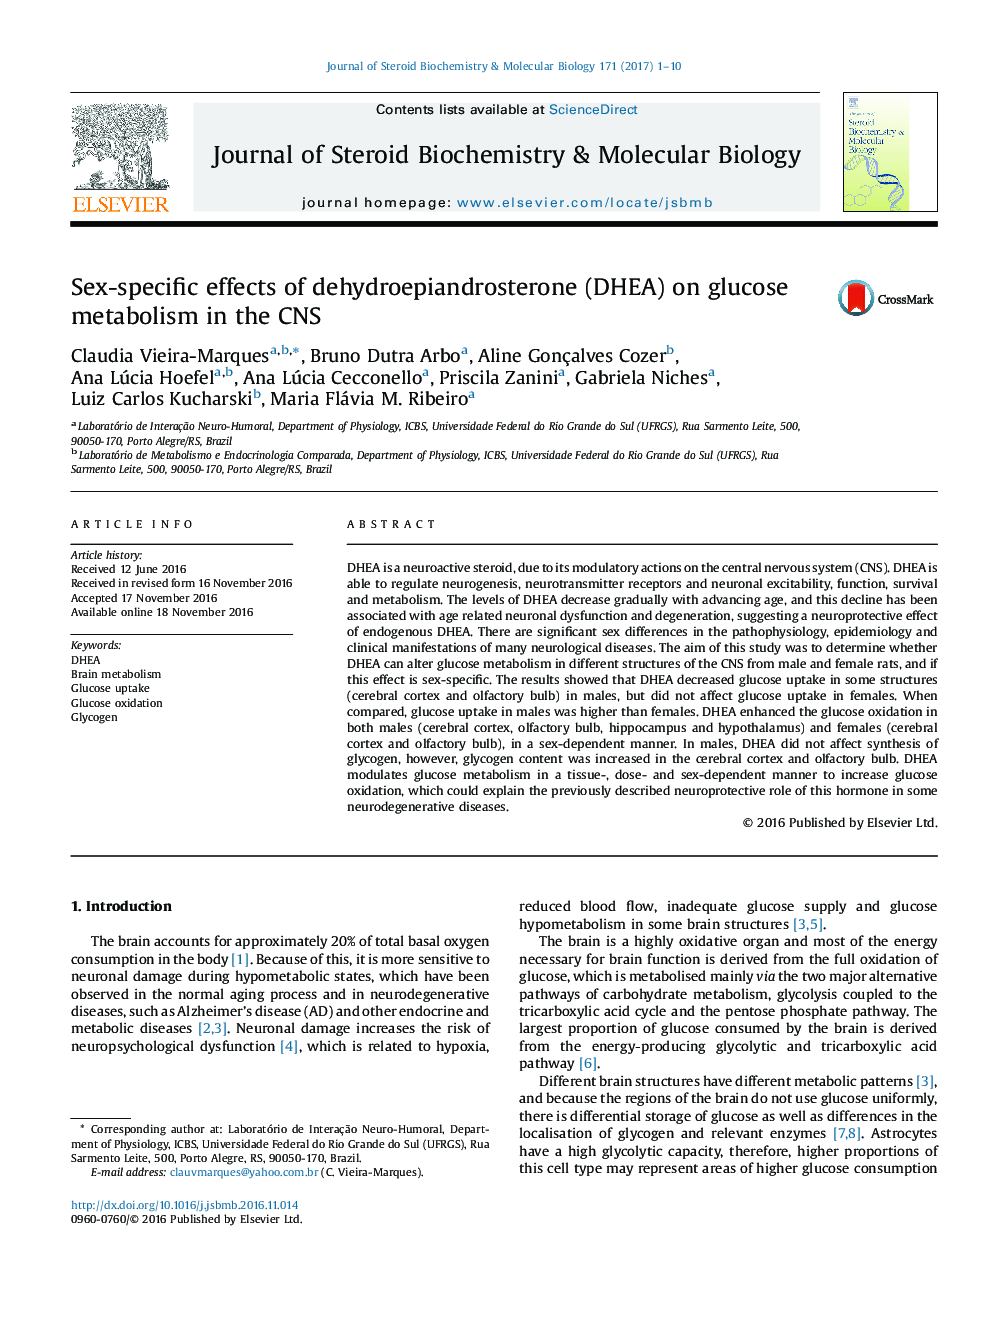 Sex-specific effects of dehydroepiandrosterone (DHEA) on glucose metabolism in the CNS